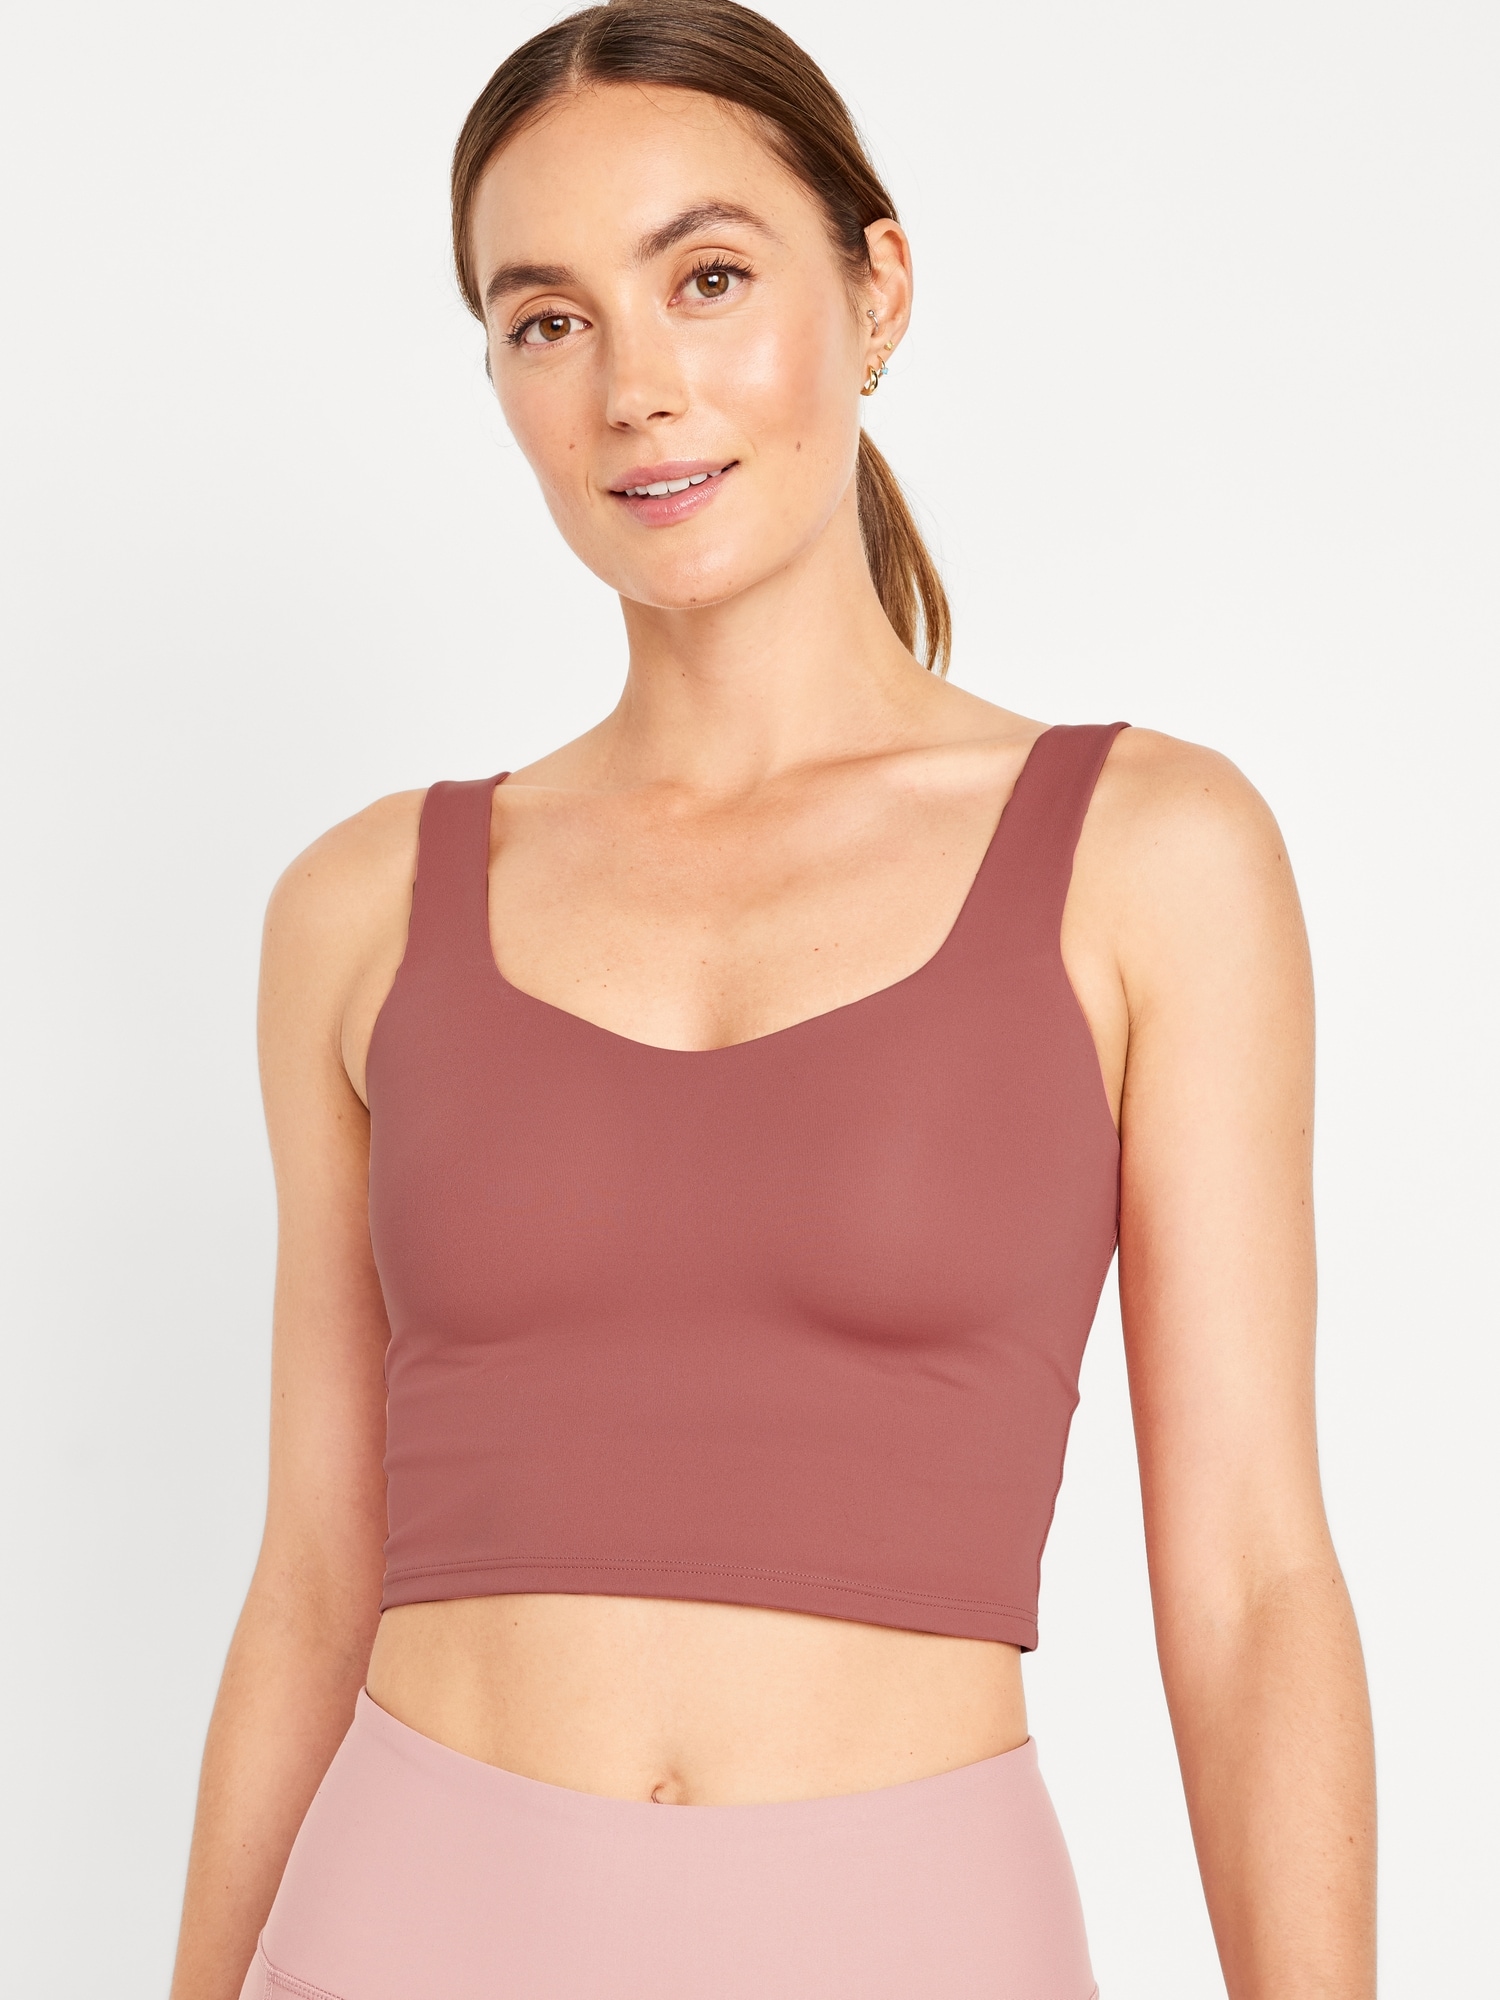 Woo Low Impact Sports Bra with Styled Back - Pink